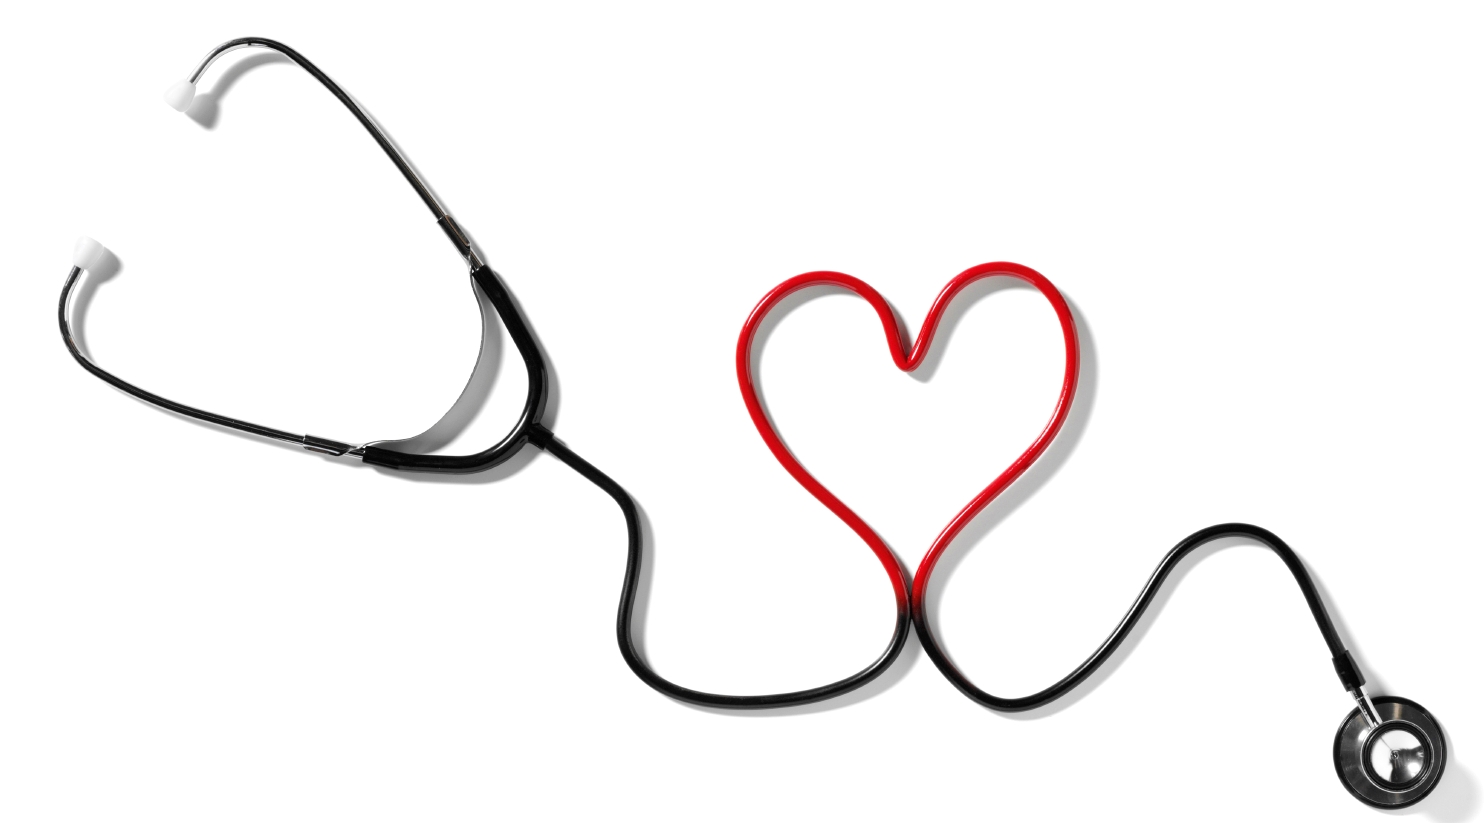 Top stethoscope and heart images for clip art